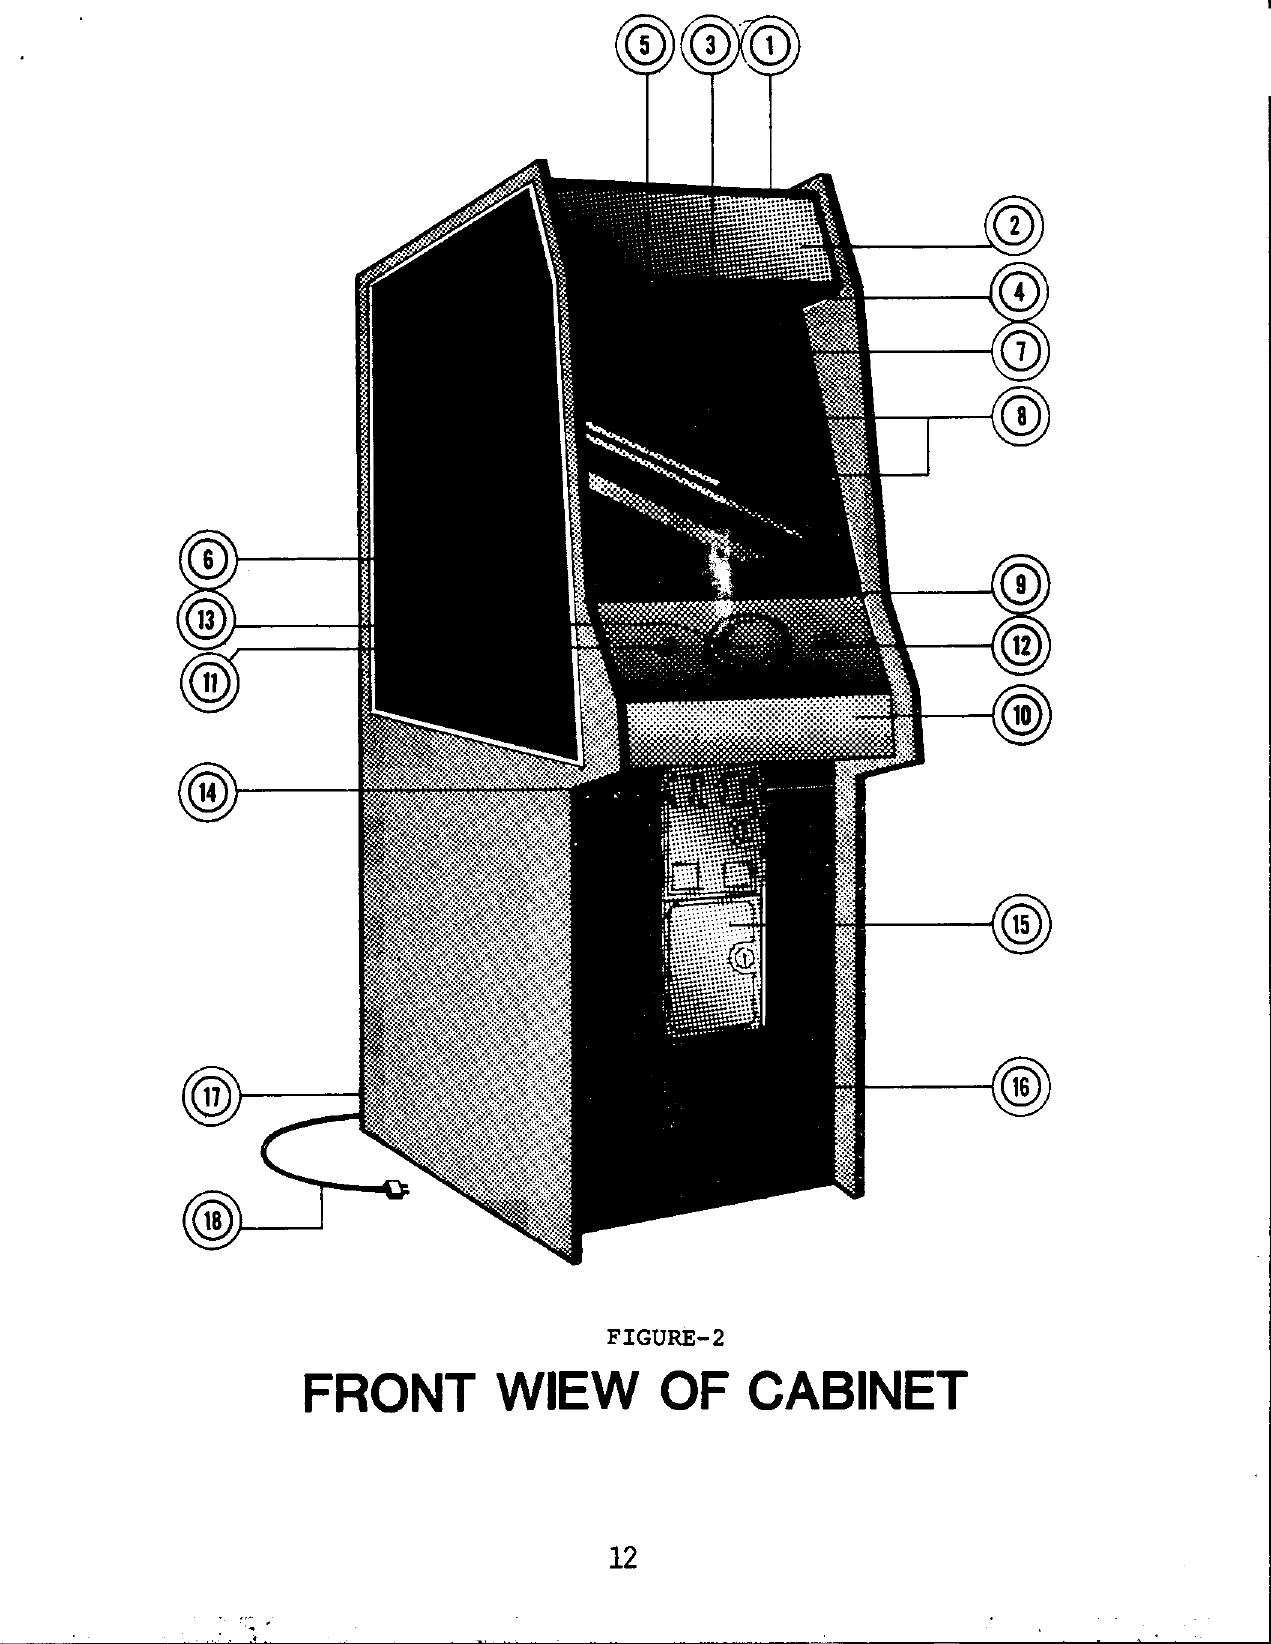 The Simpsons (4 Player Upright) (Instructions) (Scan 1) (U)